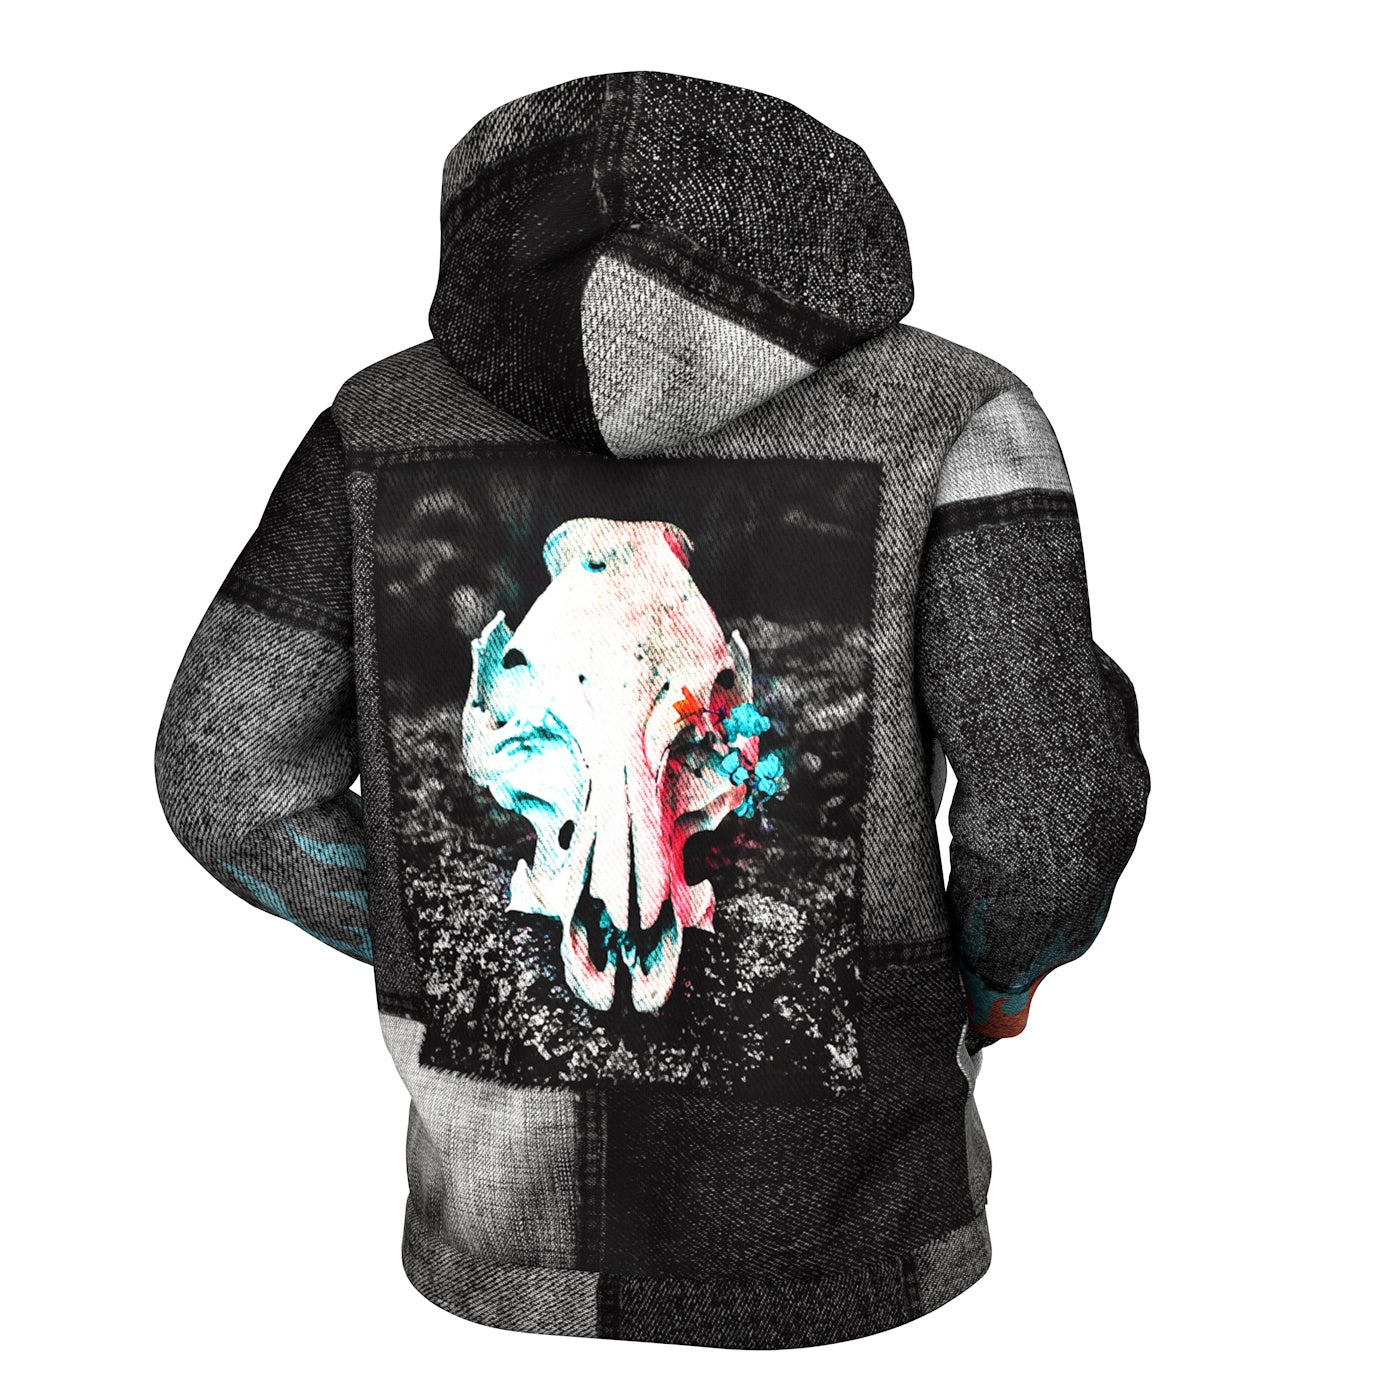 Patched Path Zip Up Hoodie